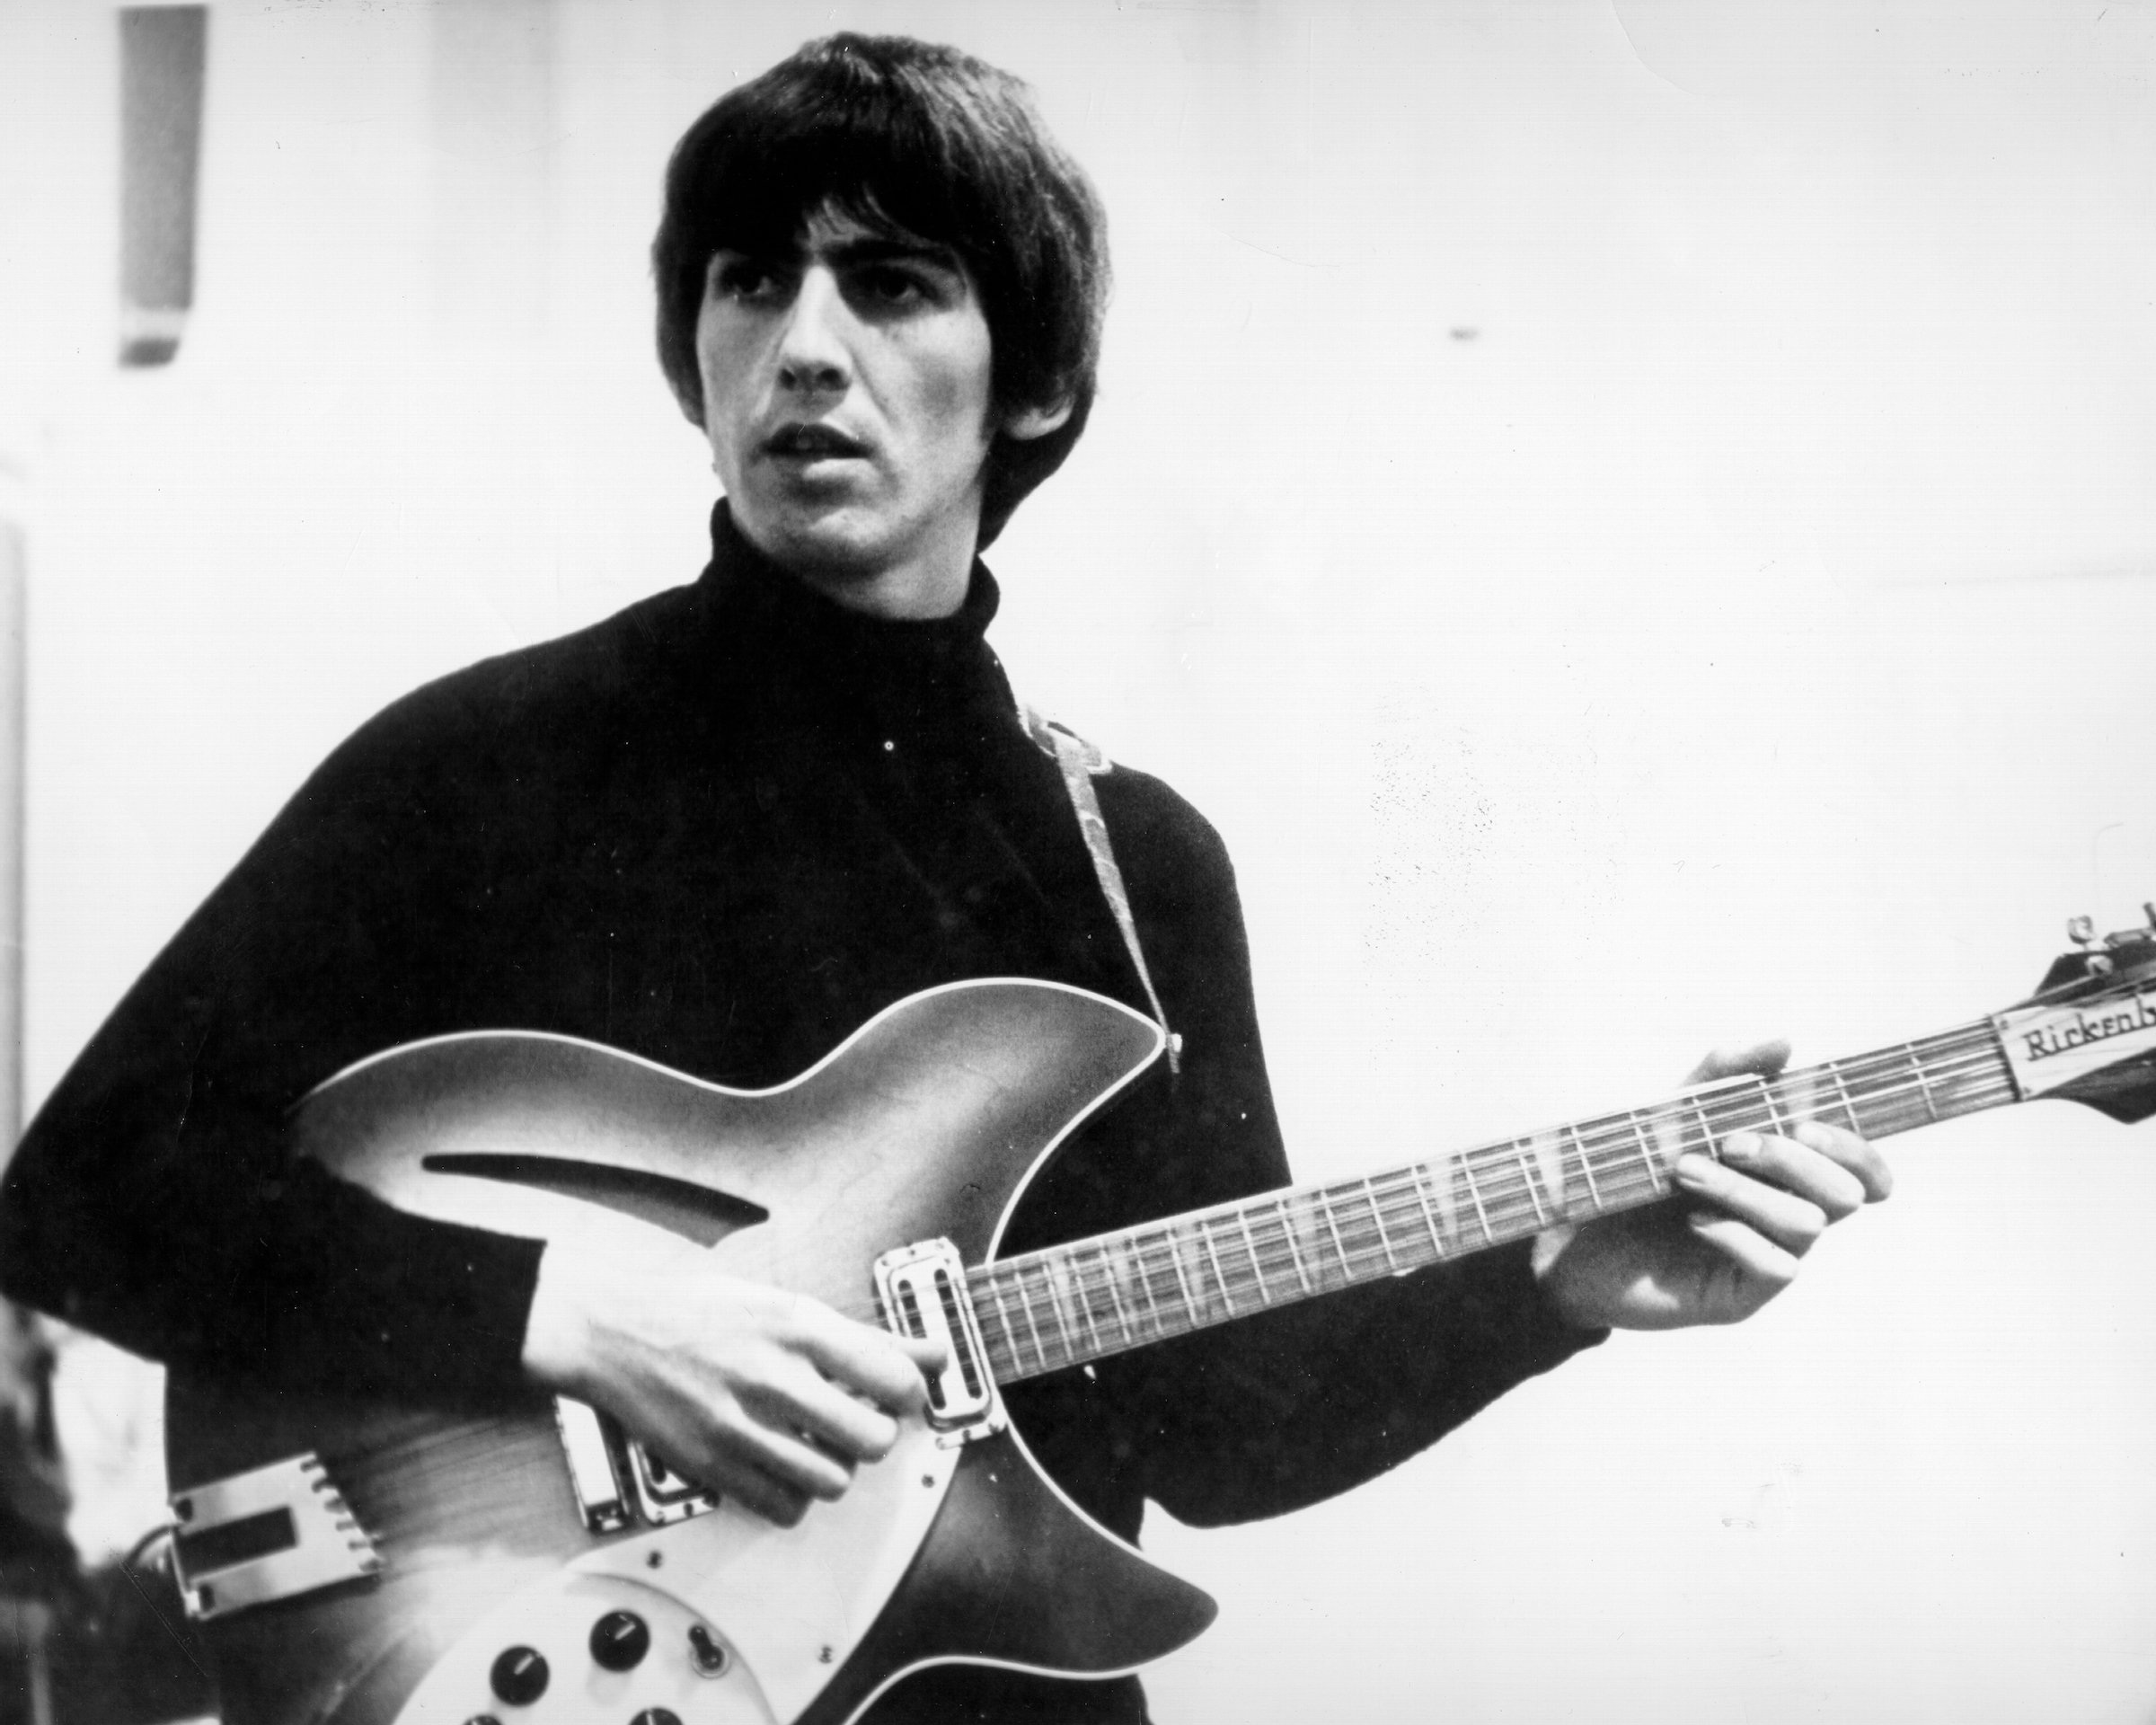 Guitarist George Harrison of the rock and roll band The Beatles records on a Rickenbacker electric guitar